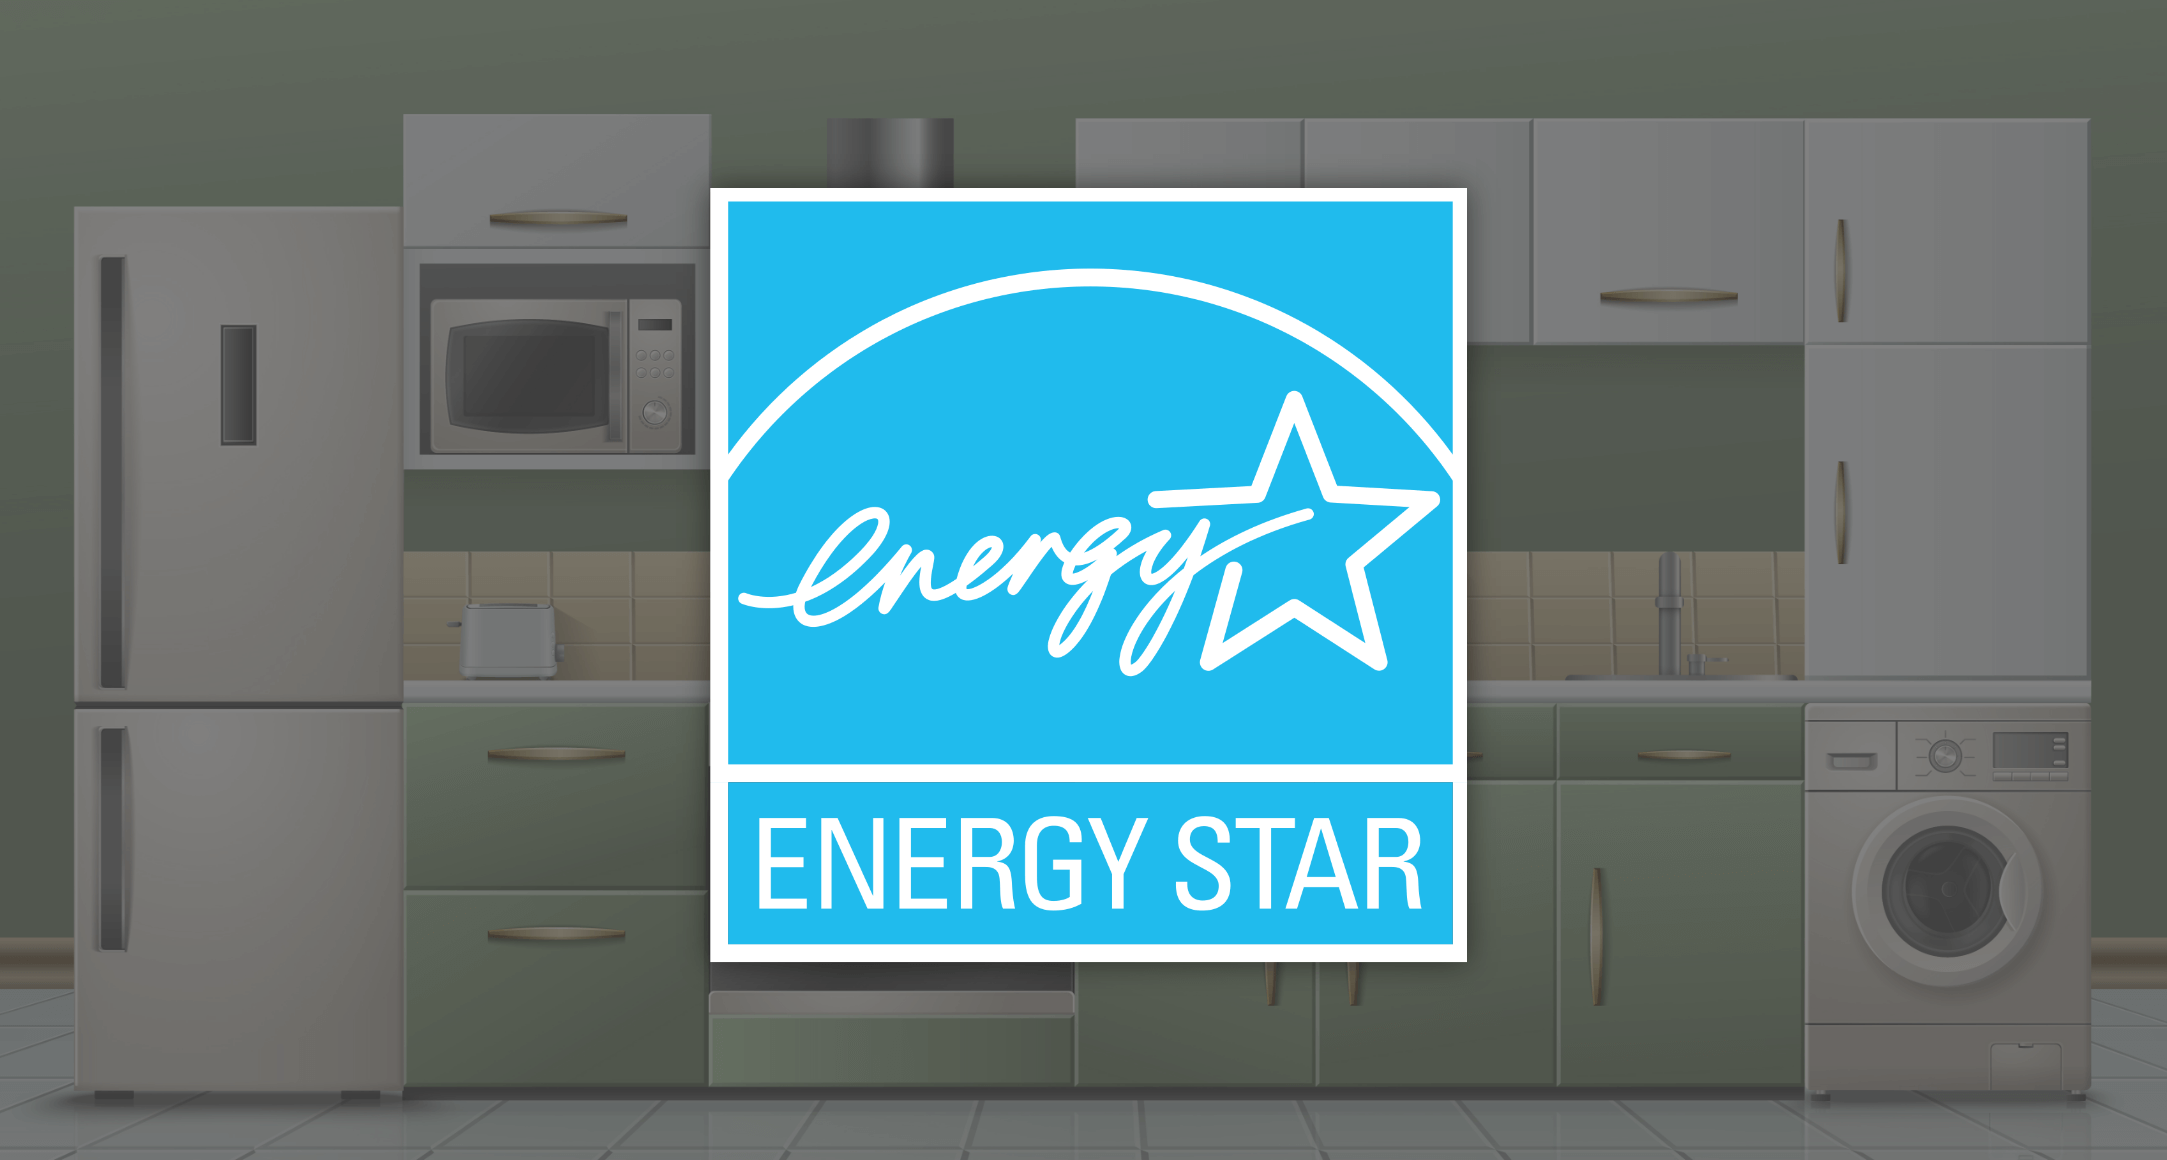 an image displaying all the necessary home appliances and the symbol of Energy Star organization which gives efficiency ratings in the USA